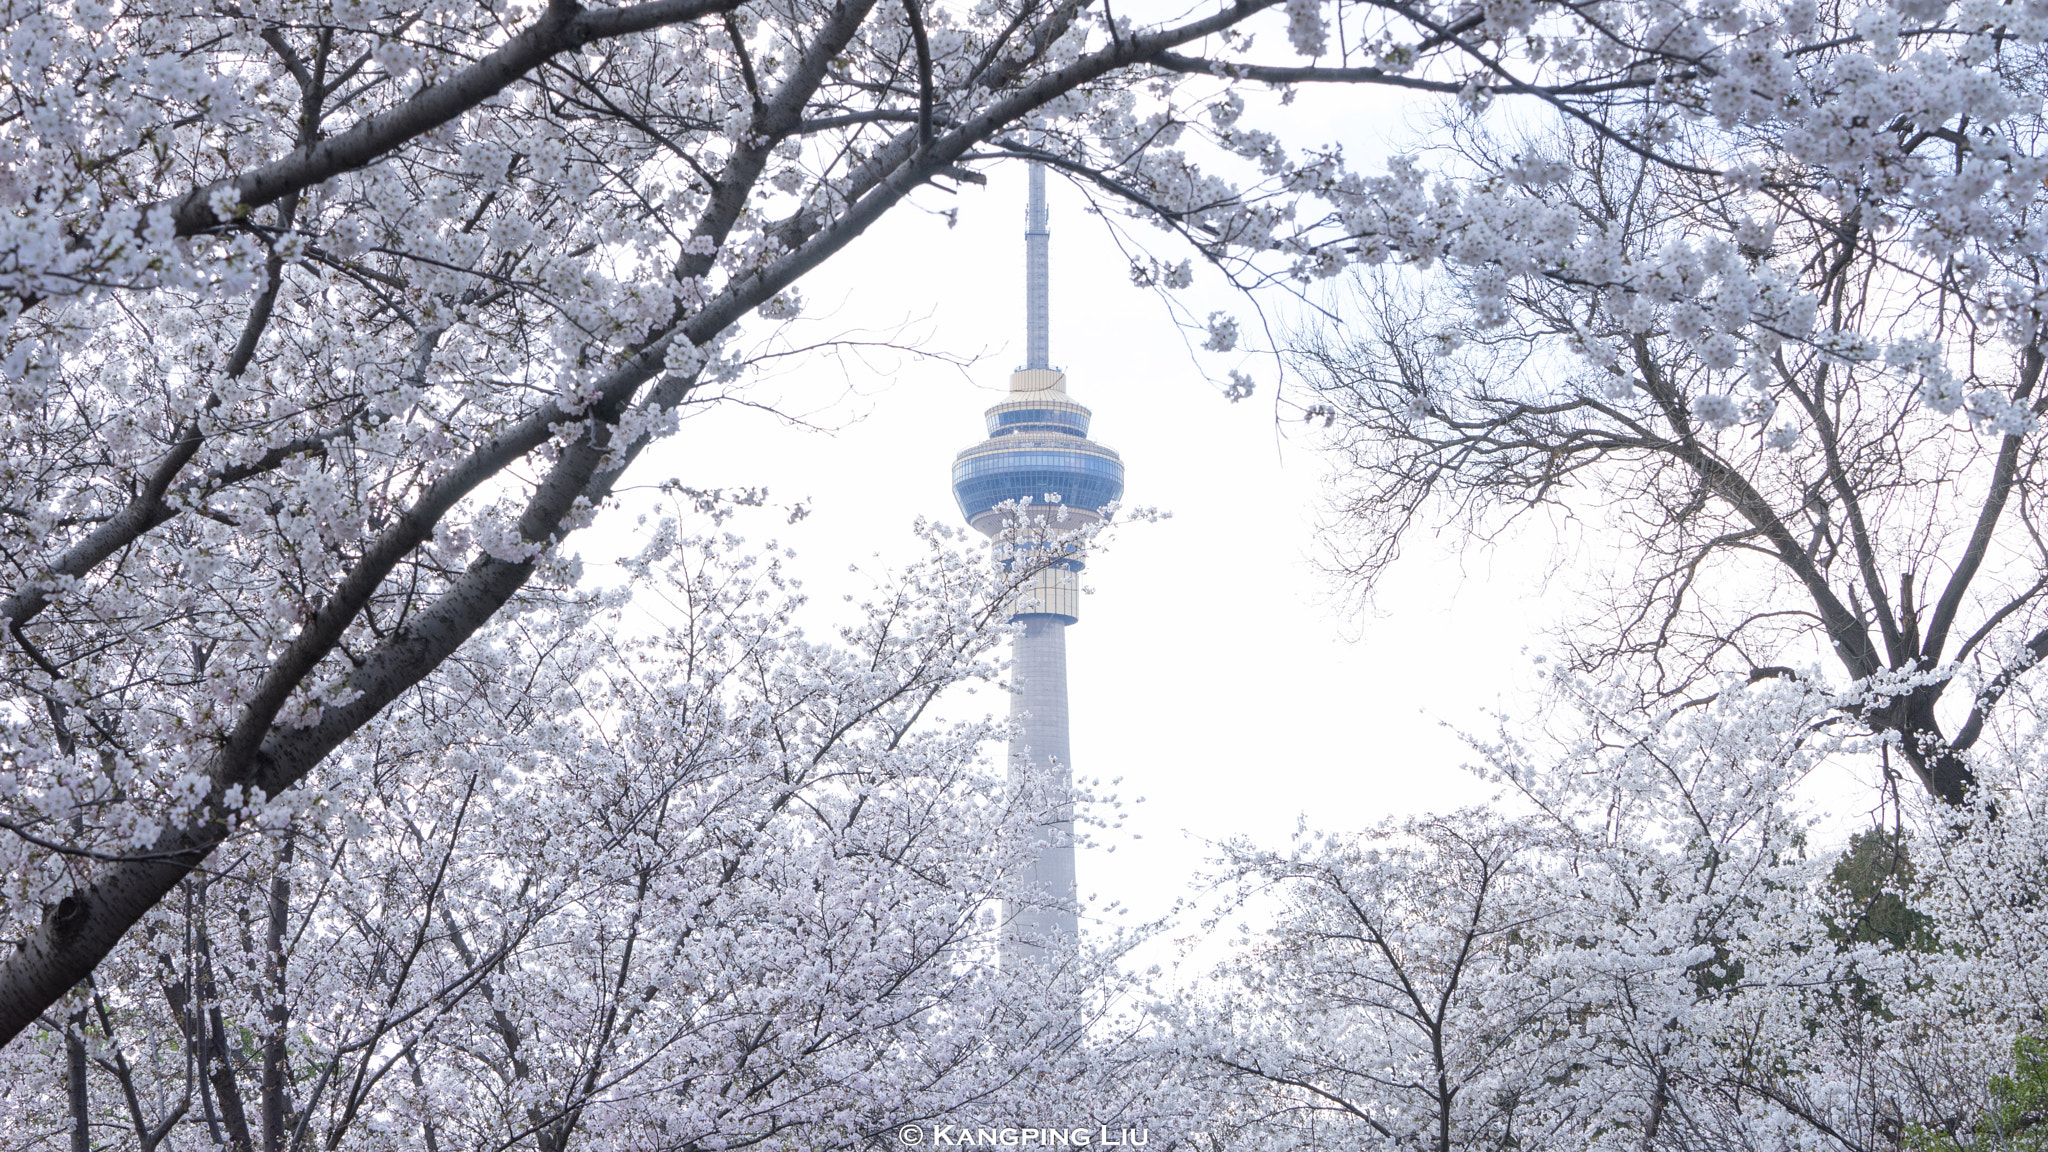 Sony a7 sample photo. Cherry blossom in beijing photography